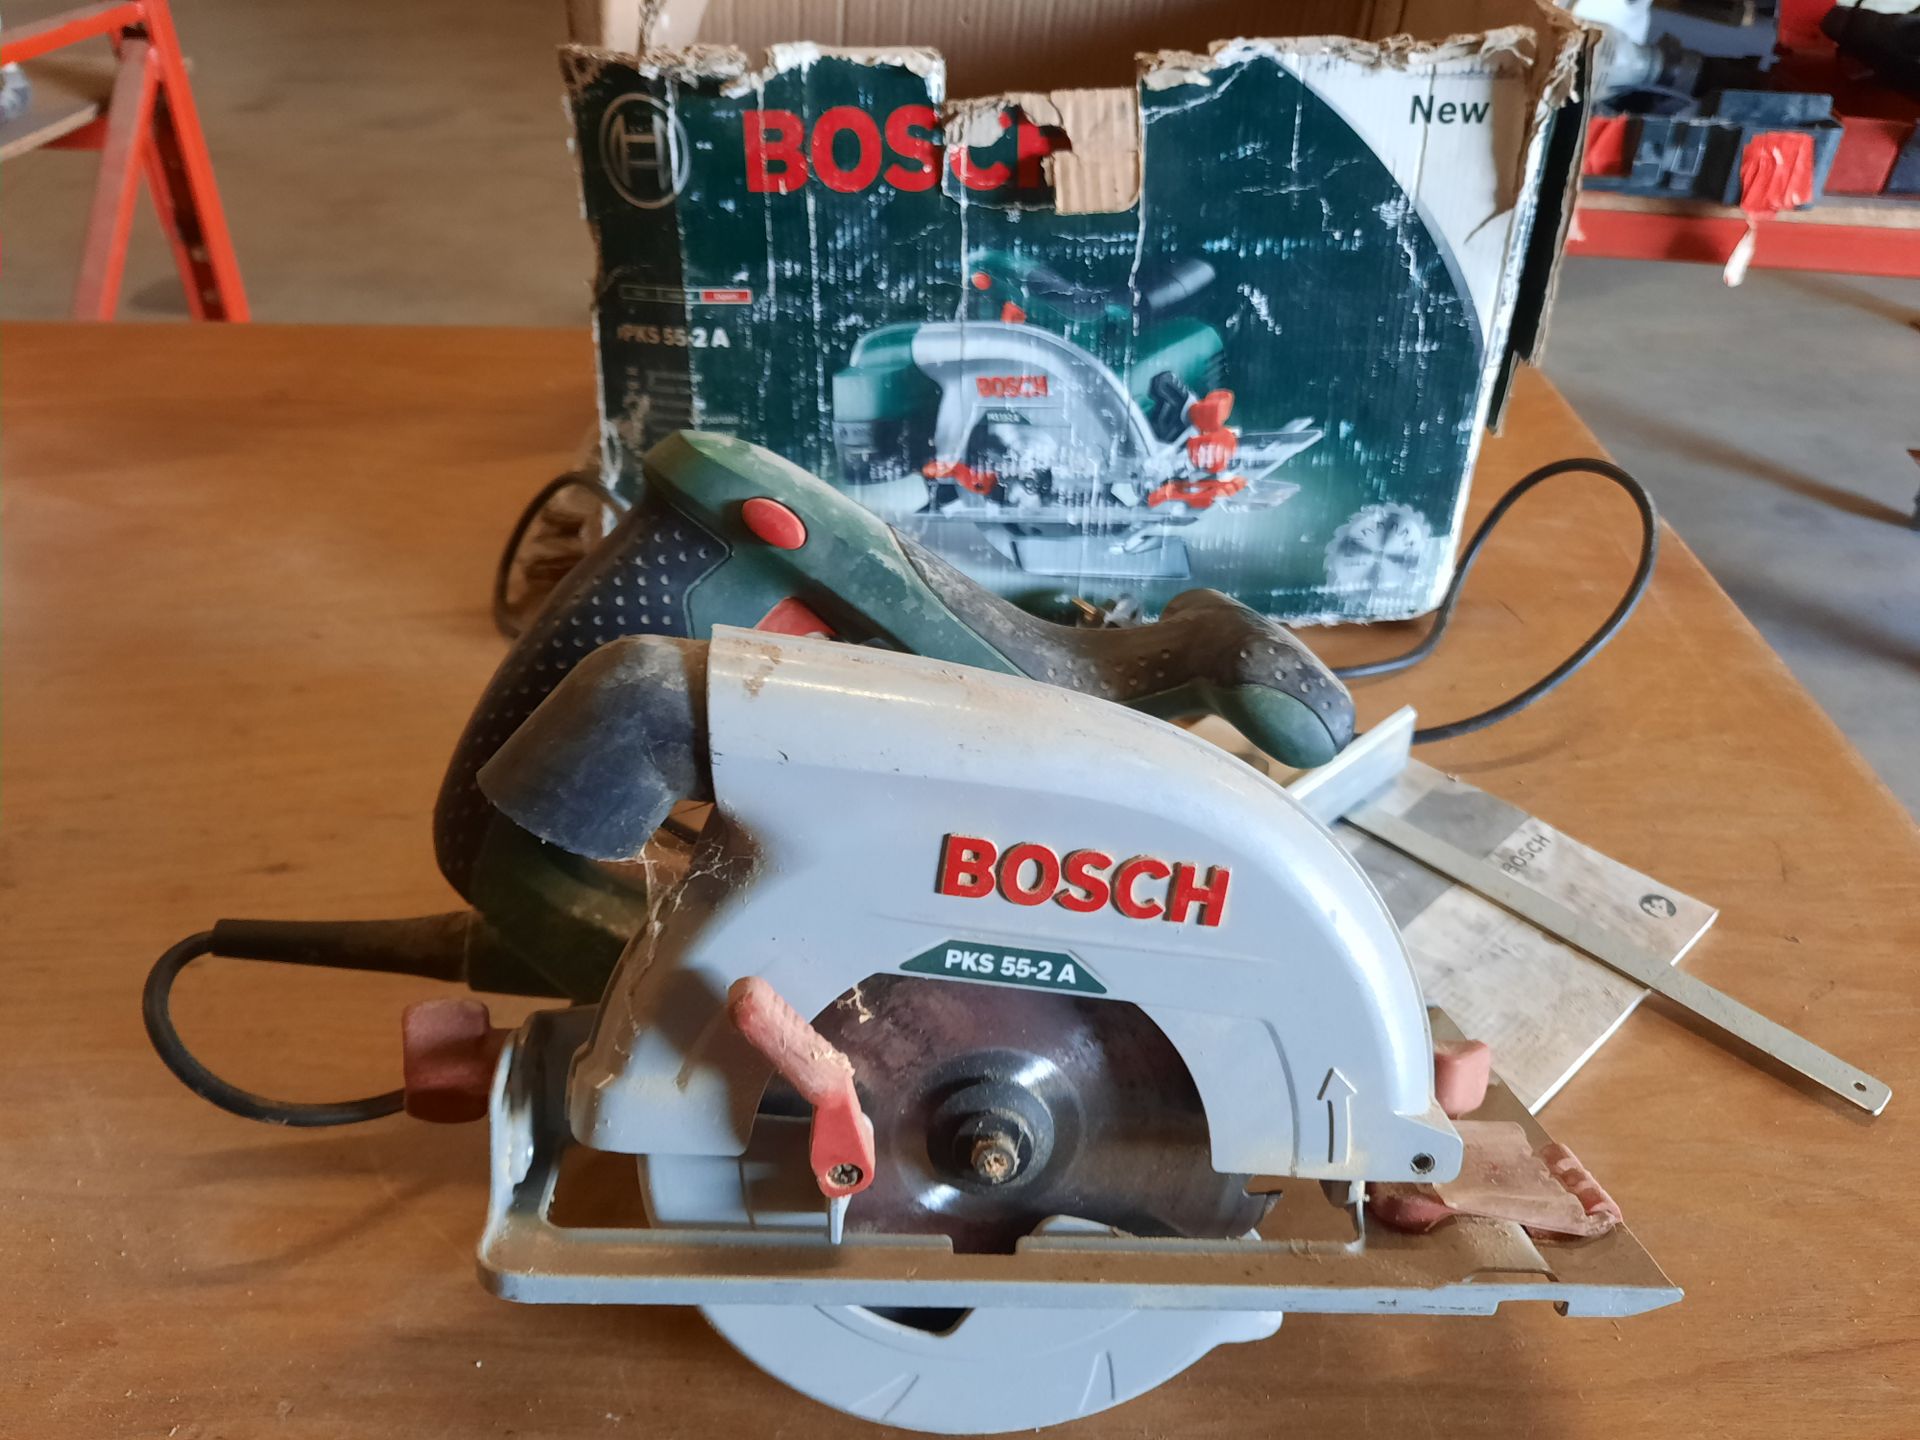 Null 1 BOSCH circular saw type PKS55-2A year 2016, serial number 607002158